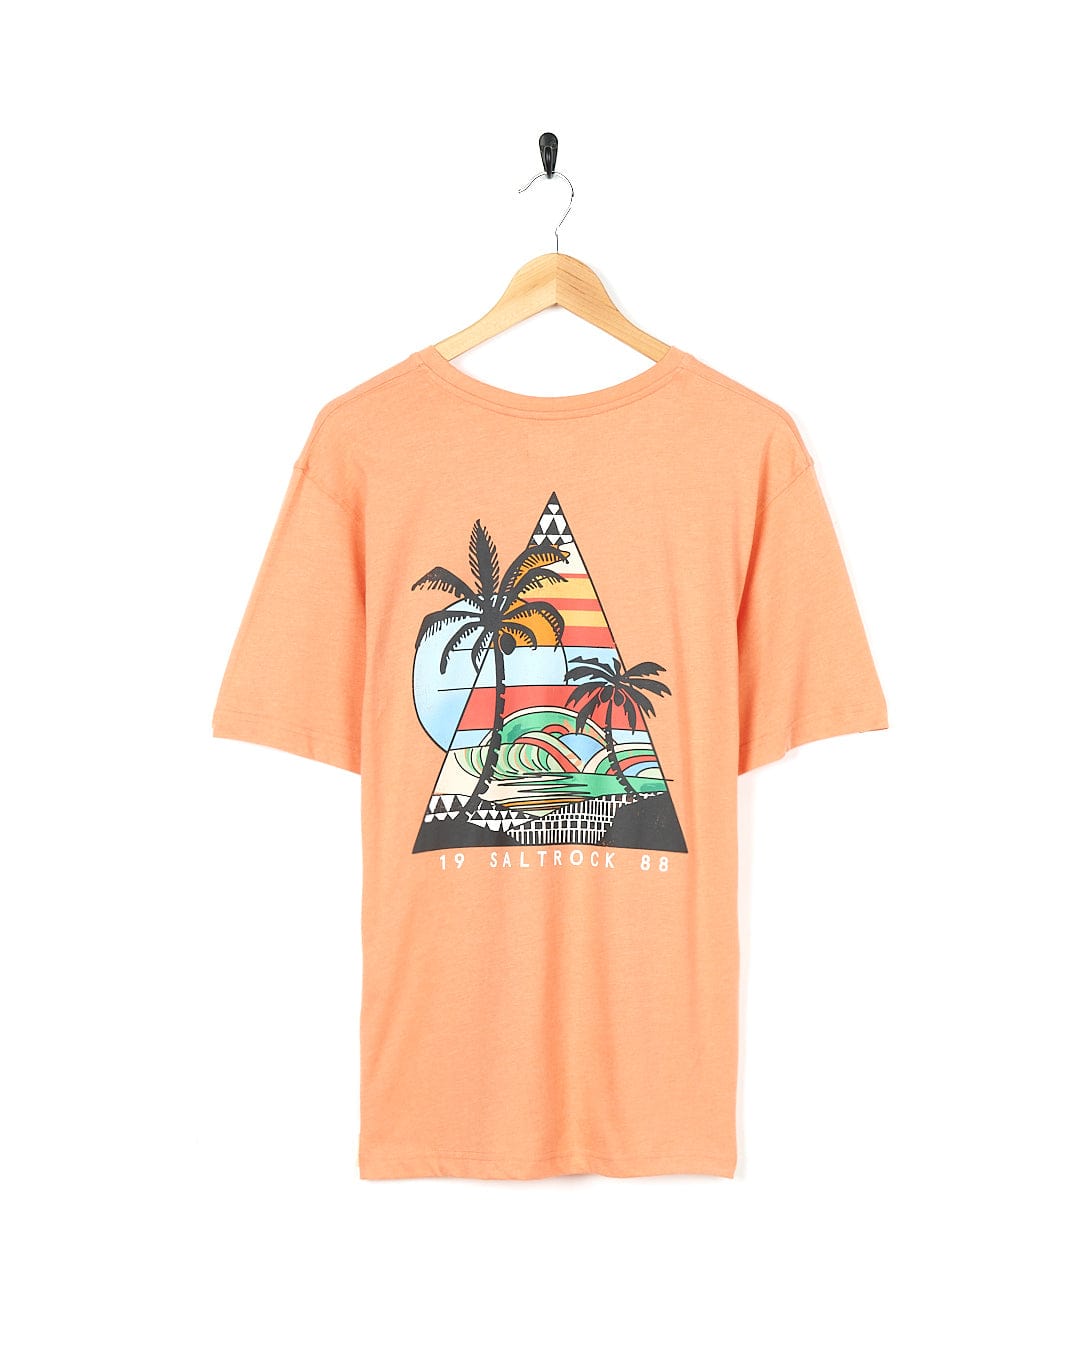 A Geo Beach - Mens Short Sleeve T-Shirt - Coral by Saltrock with a palm tree and a surfboard on it.